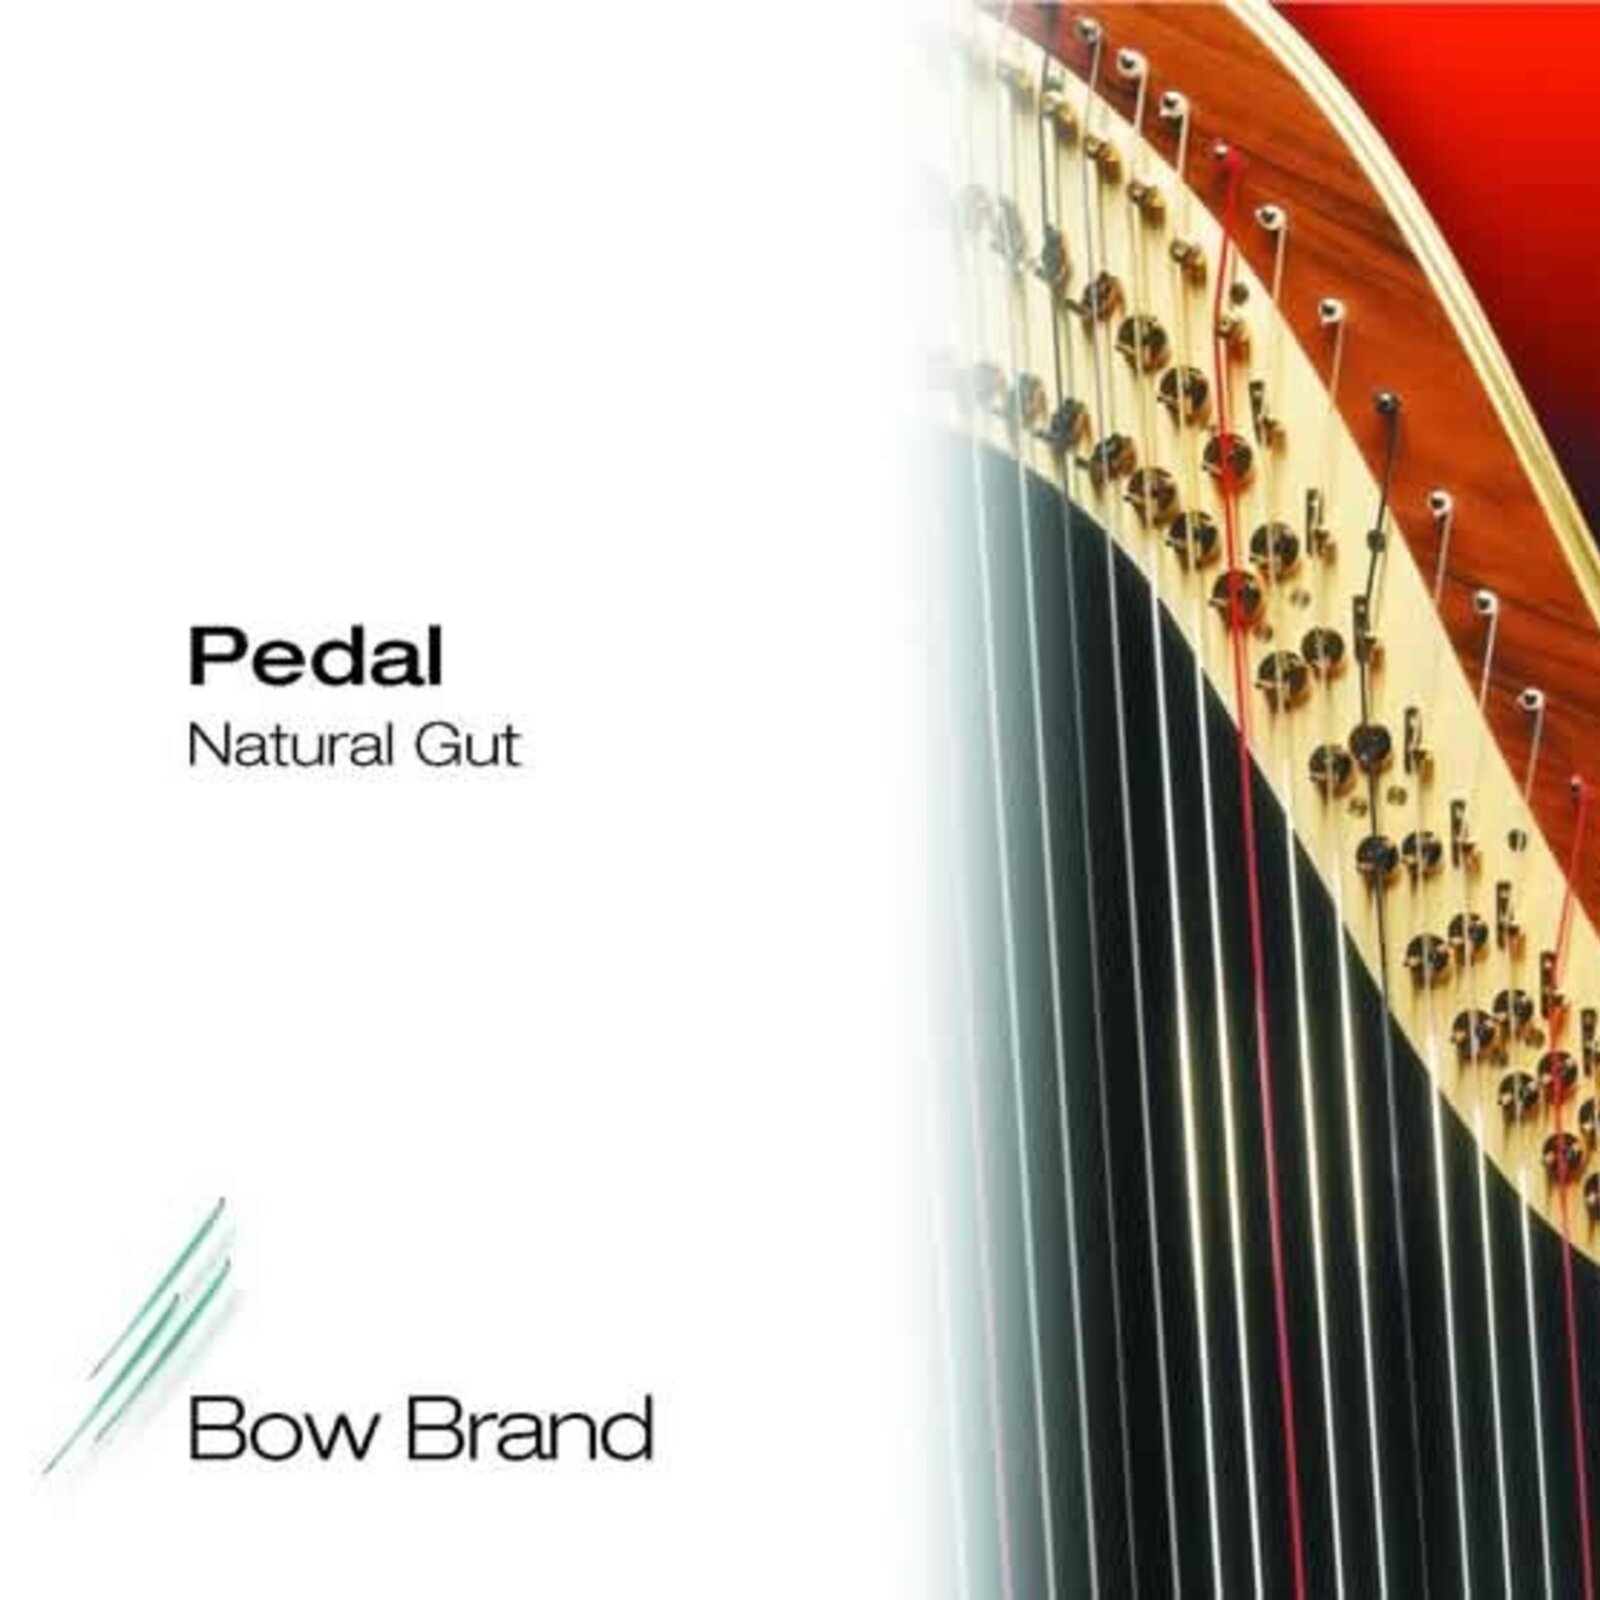 Bow Brand N 29 E 5th octave in gut for pedal harp : photo 1